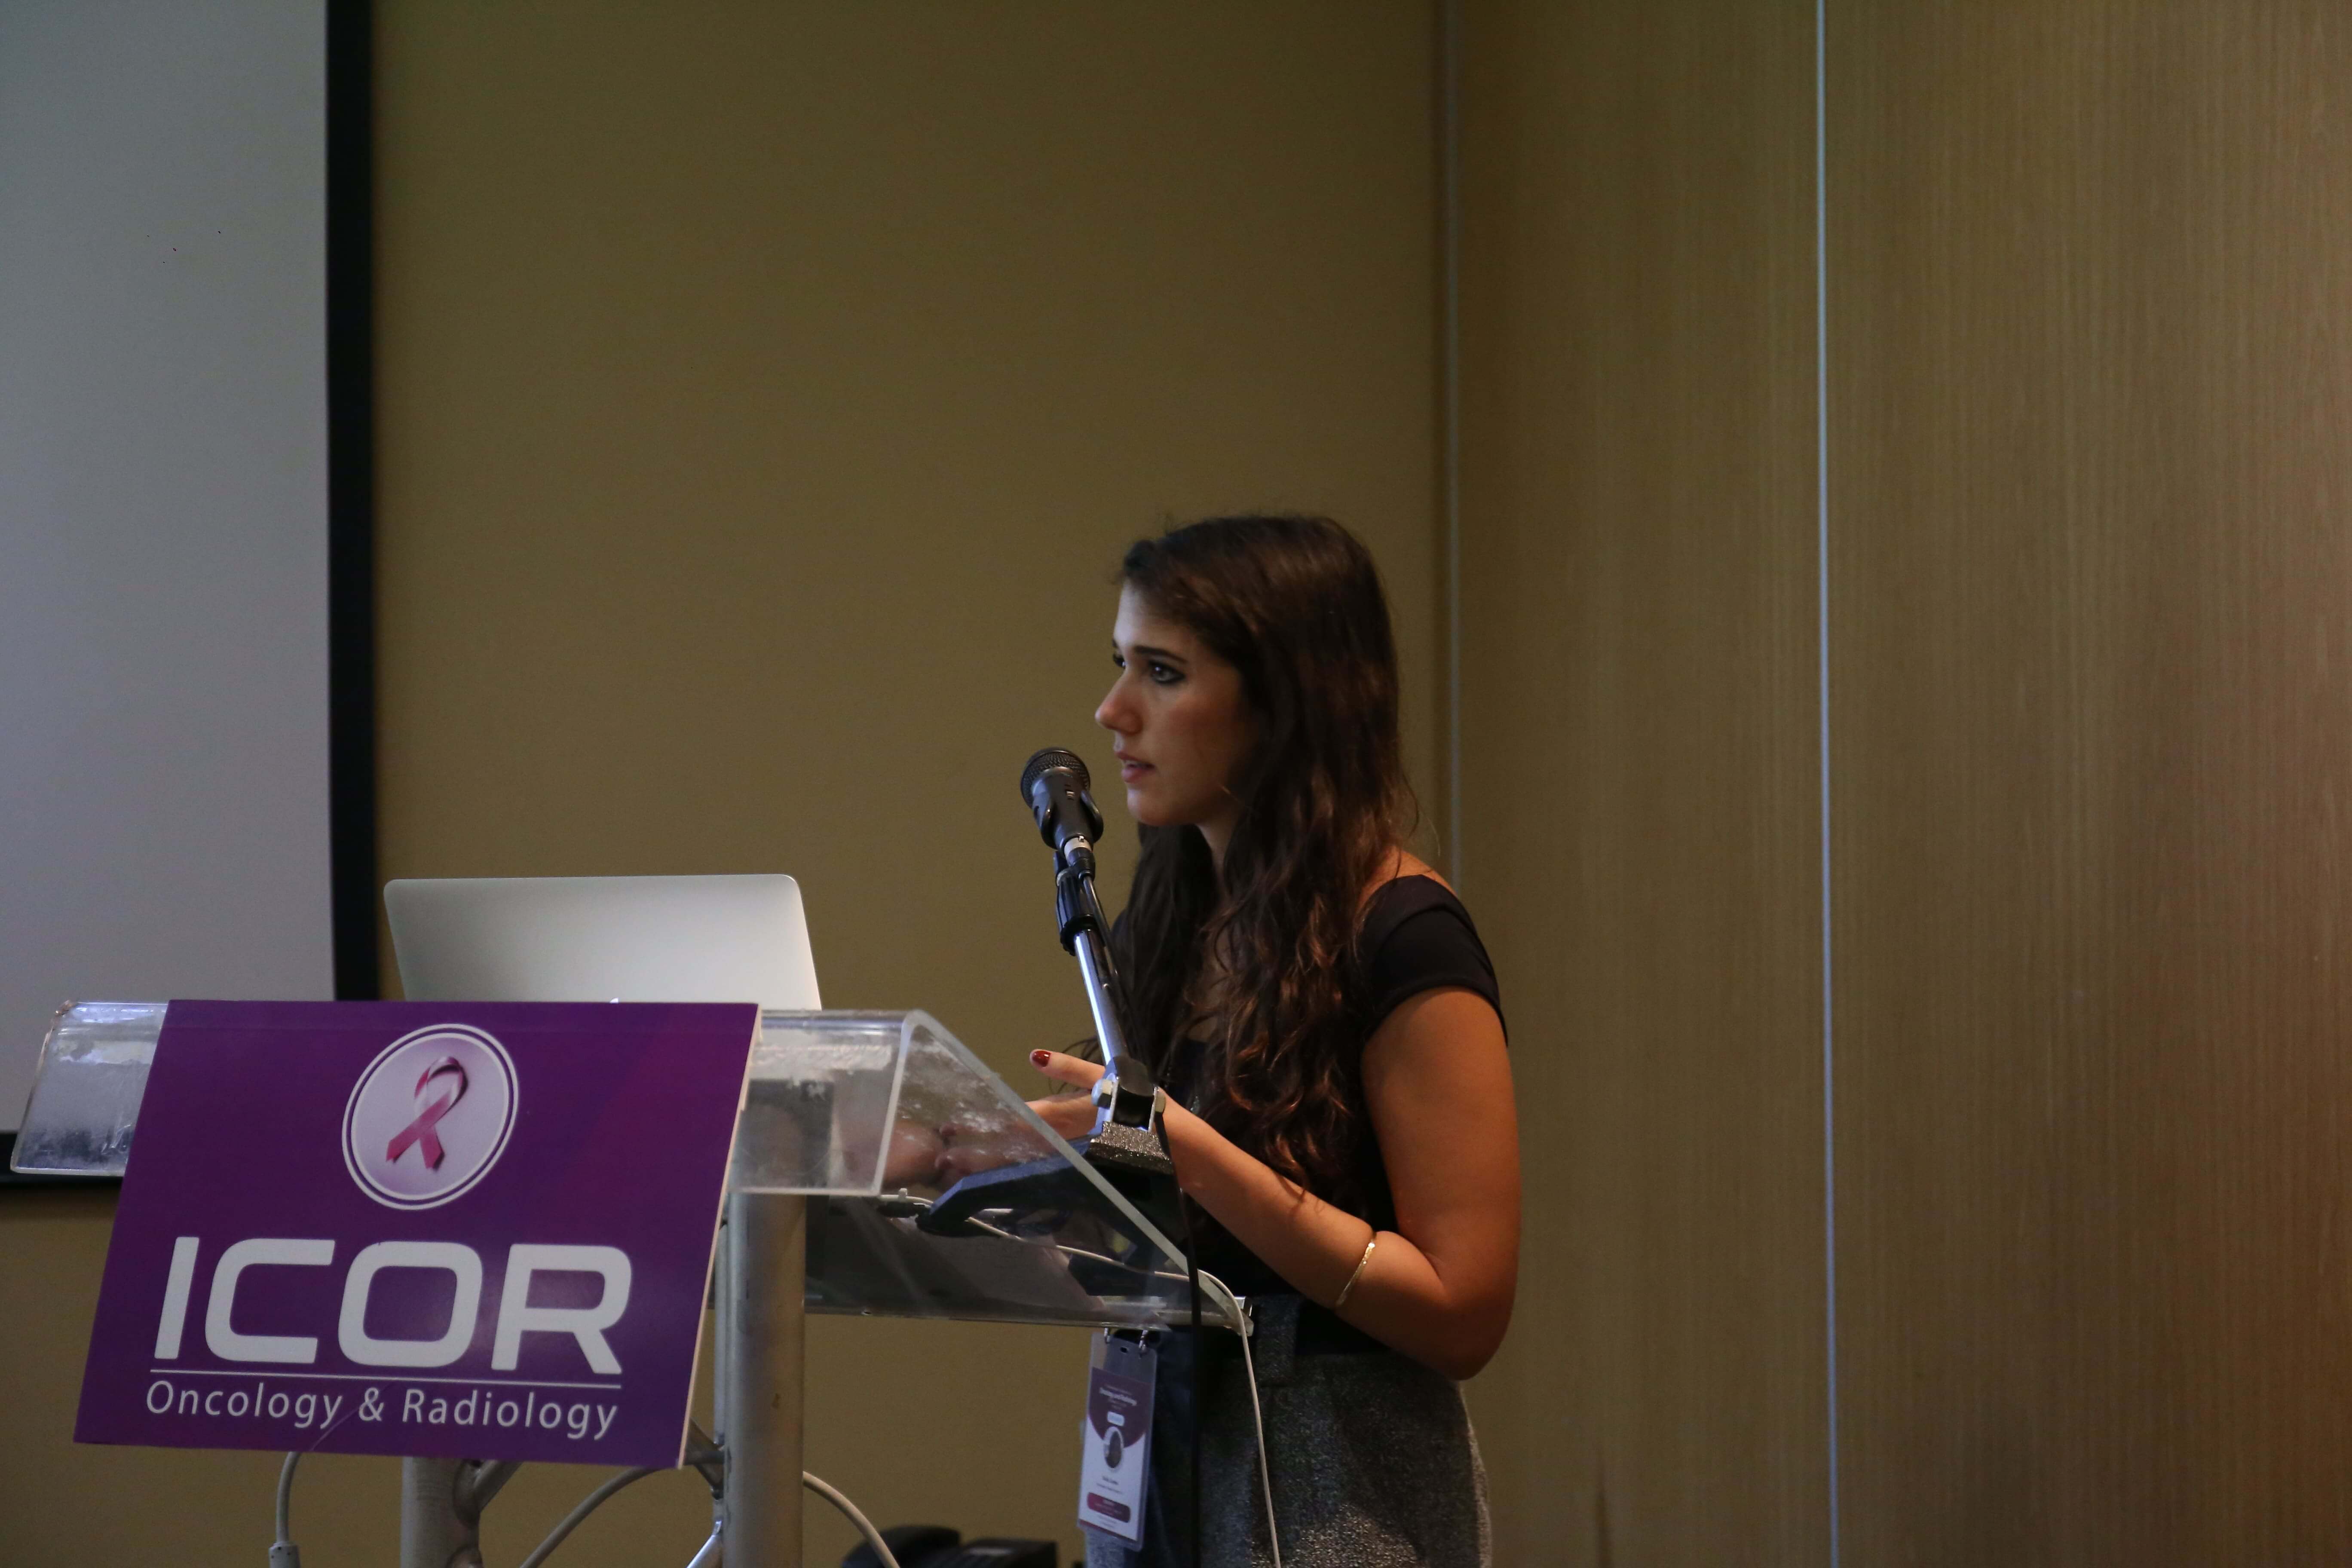 Cancer research conferences - Giulia Zumbo